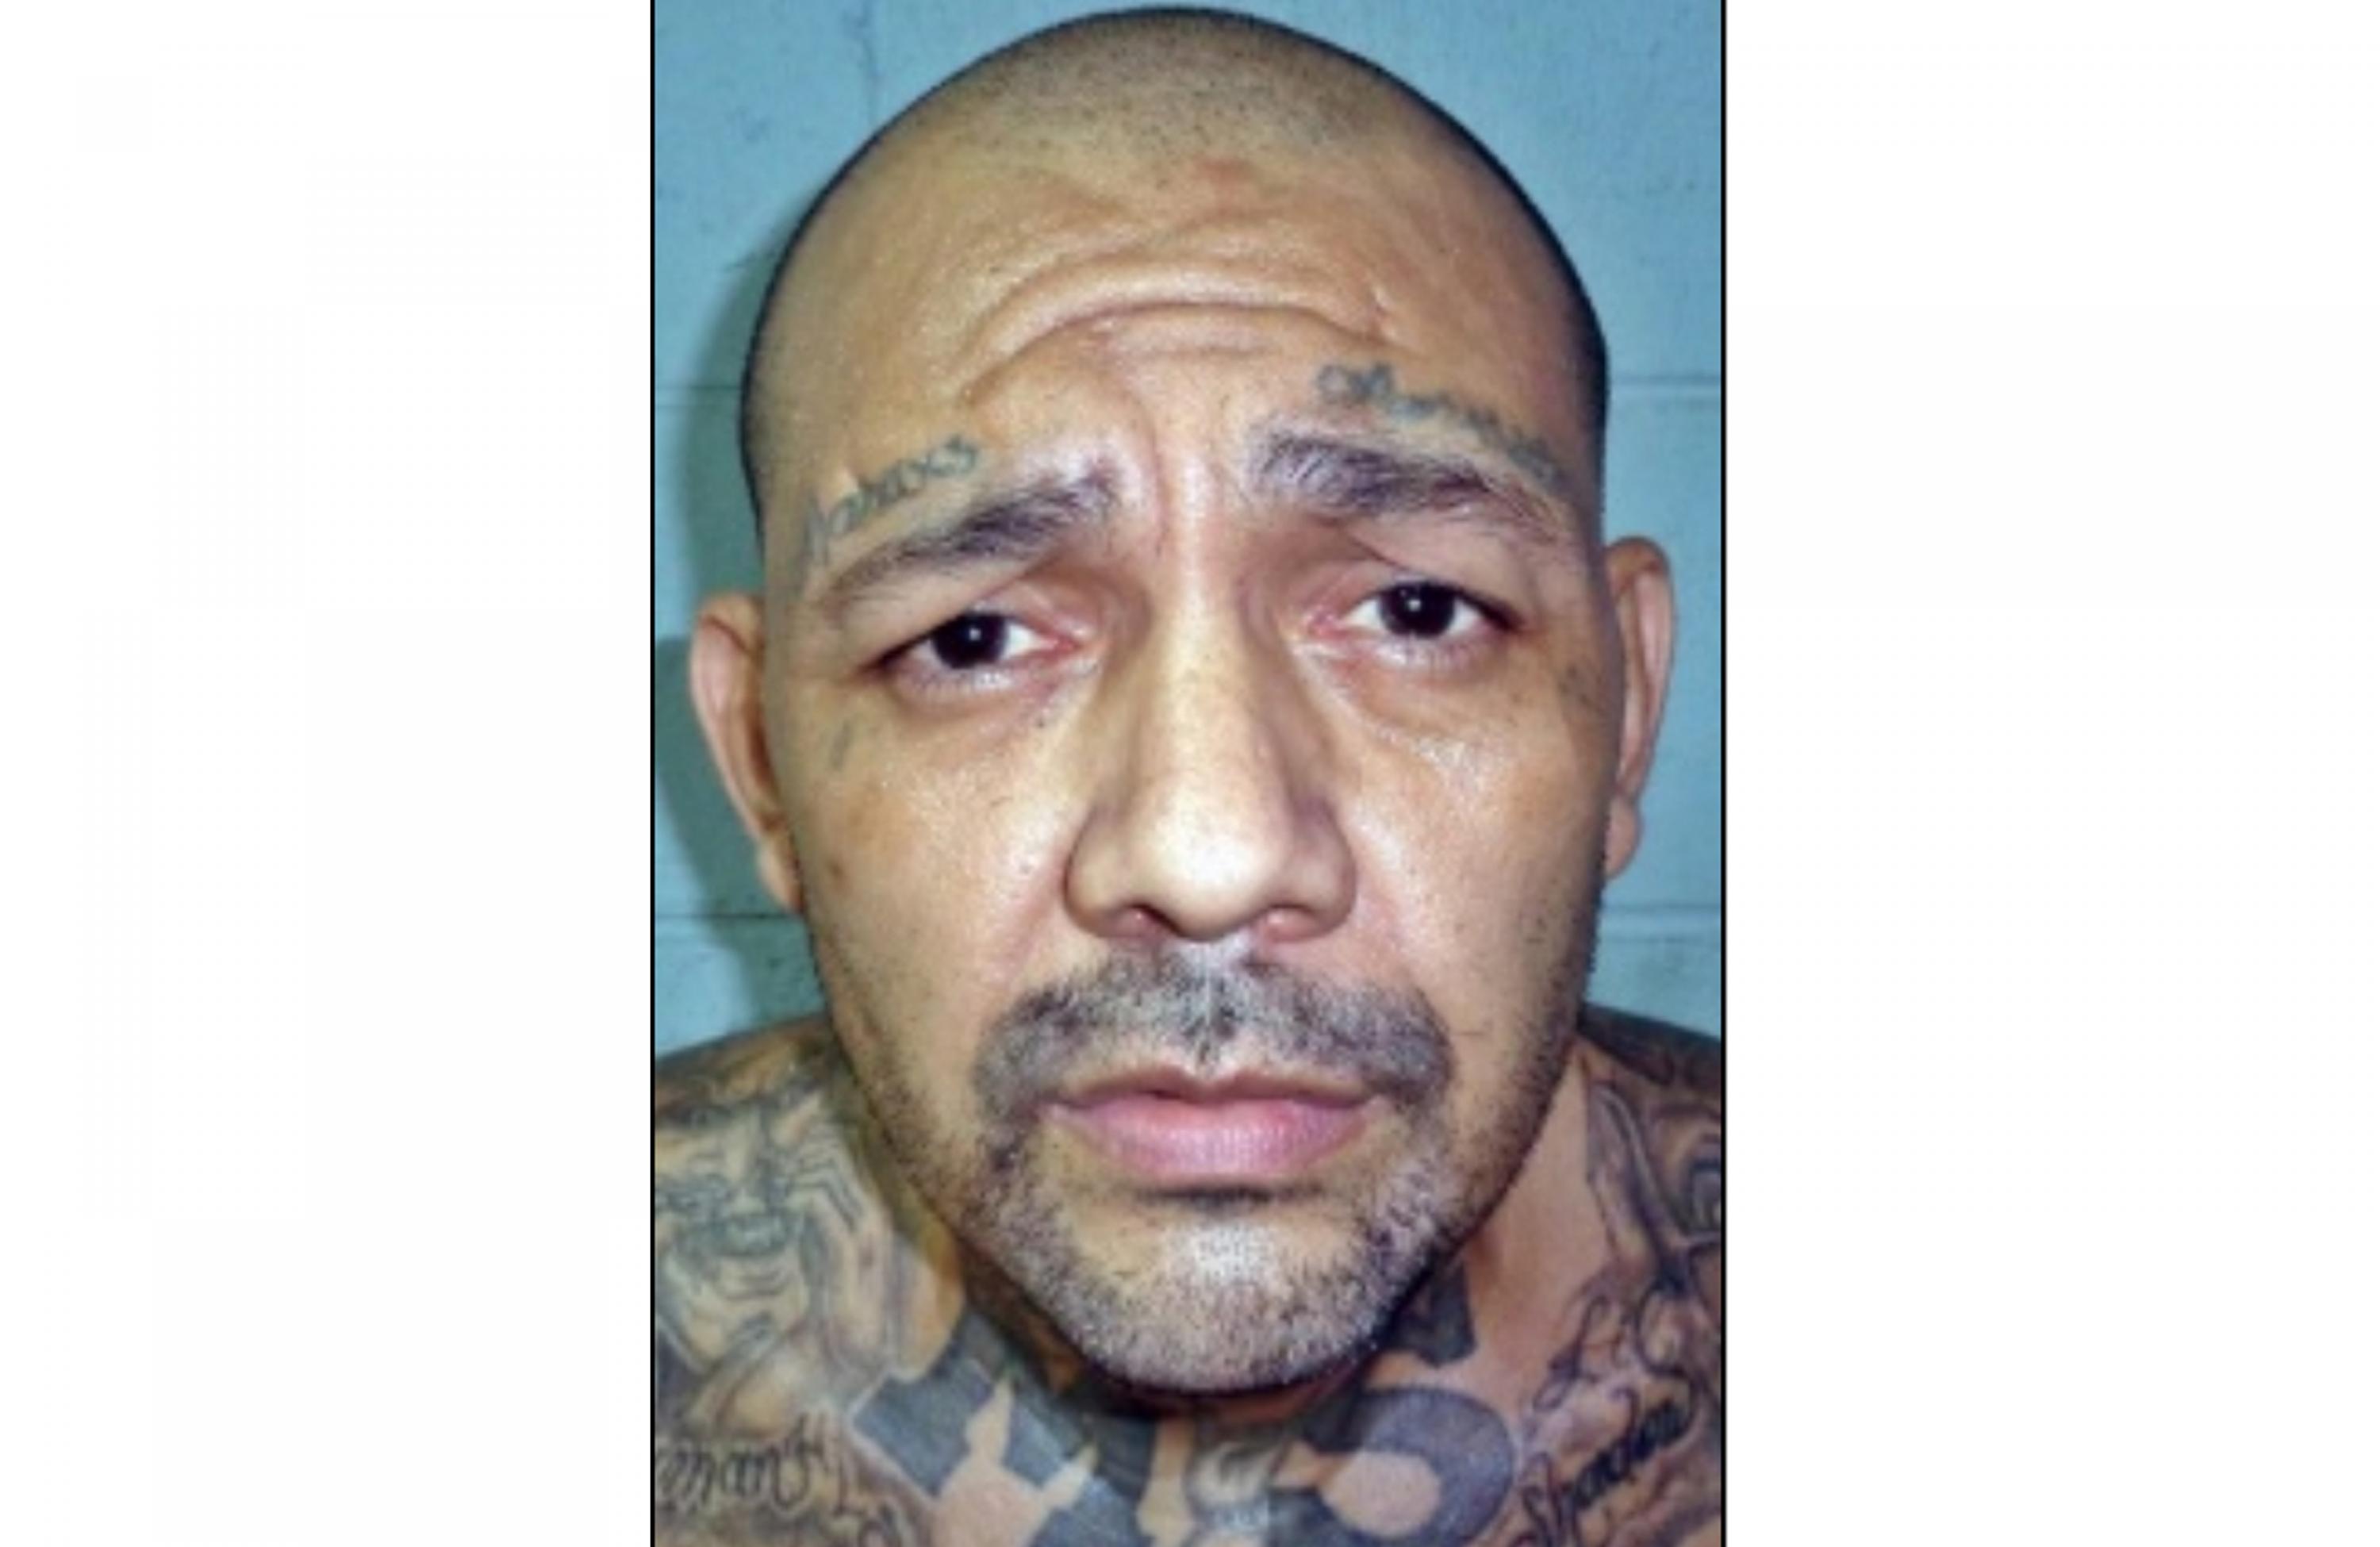 Picture of Fredy Iván Jandres Parada, alias Lucky, who was arrested this March. According to U.S. authorities, he was apprehended in San Diego, California.